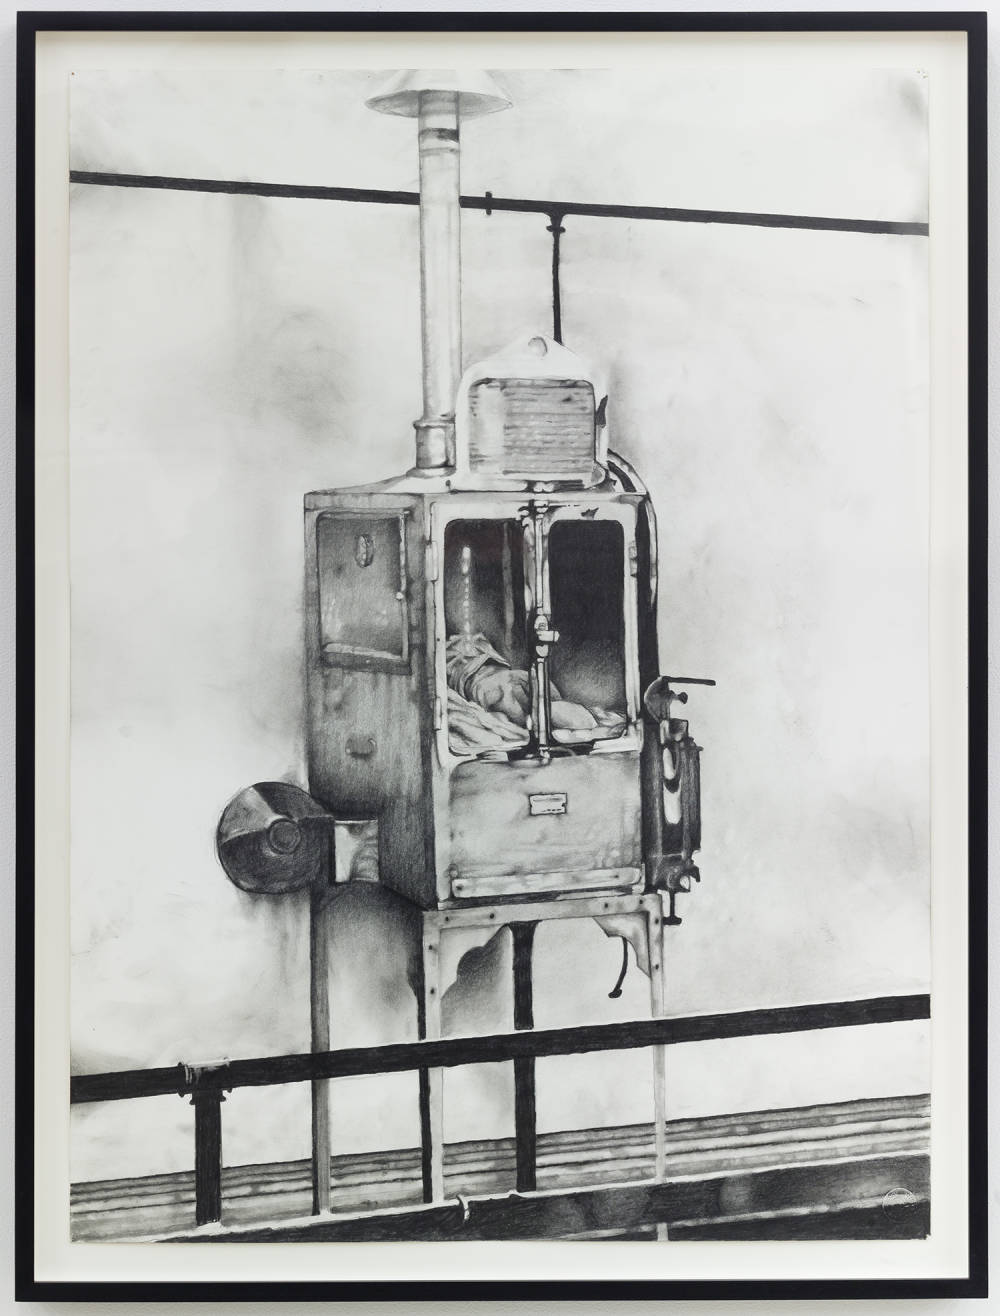 Image of a framed, detailed graphite drawing of an old industrial type object, that might be some sort of oven or cubby, which has two glass door windows  and has various pipes and attachments and is attached to the ceiling via a pipe.